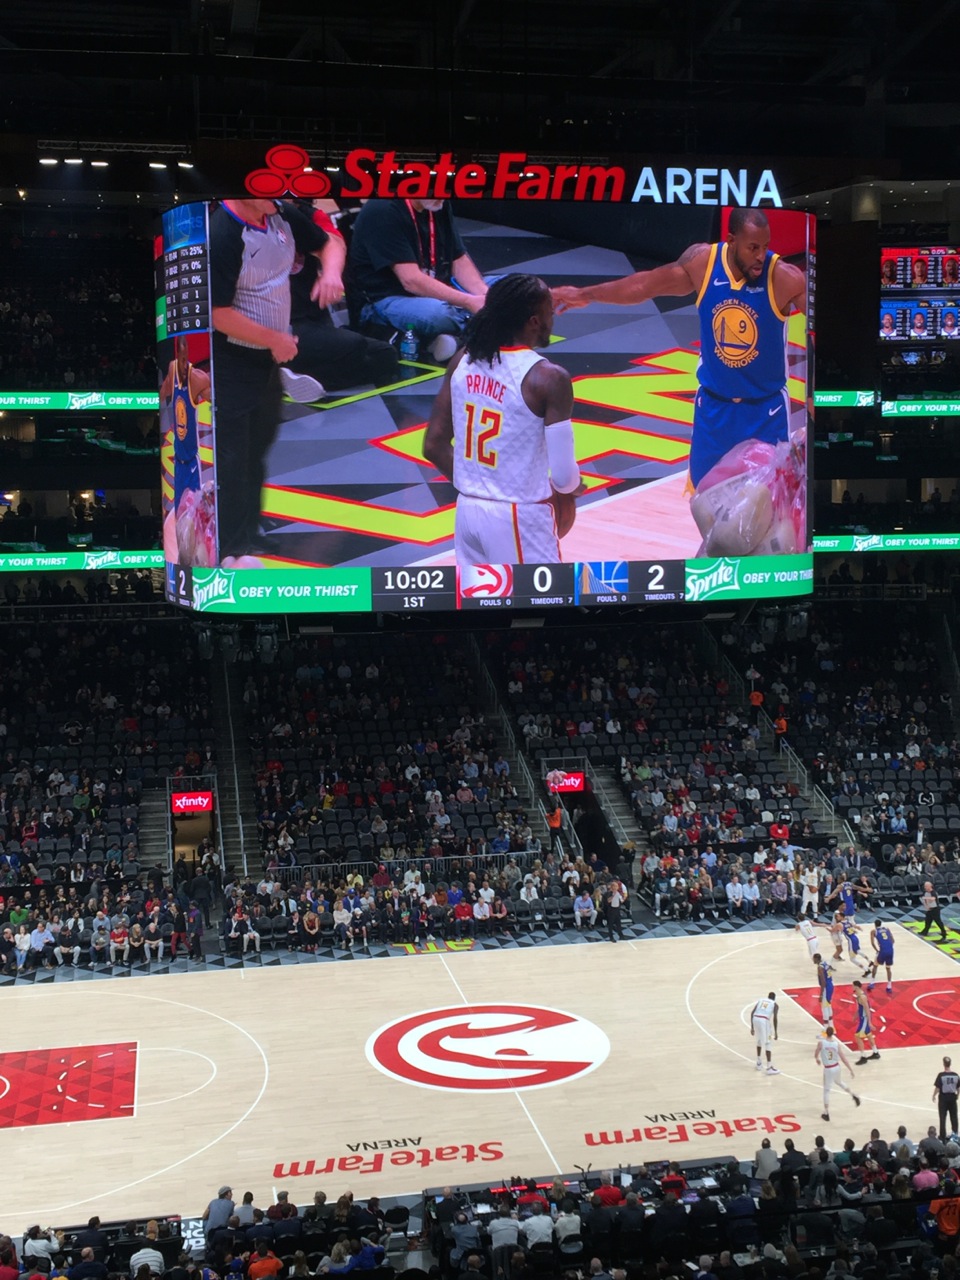 Atlanta Hawks: Check out team's newly renovated arena